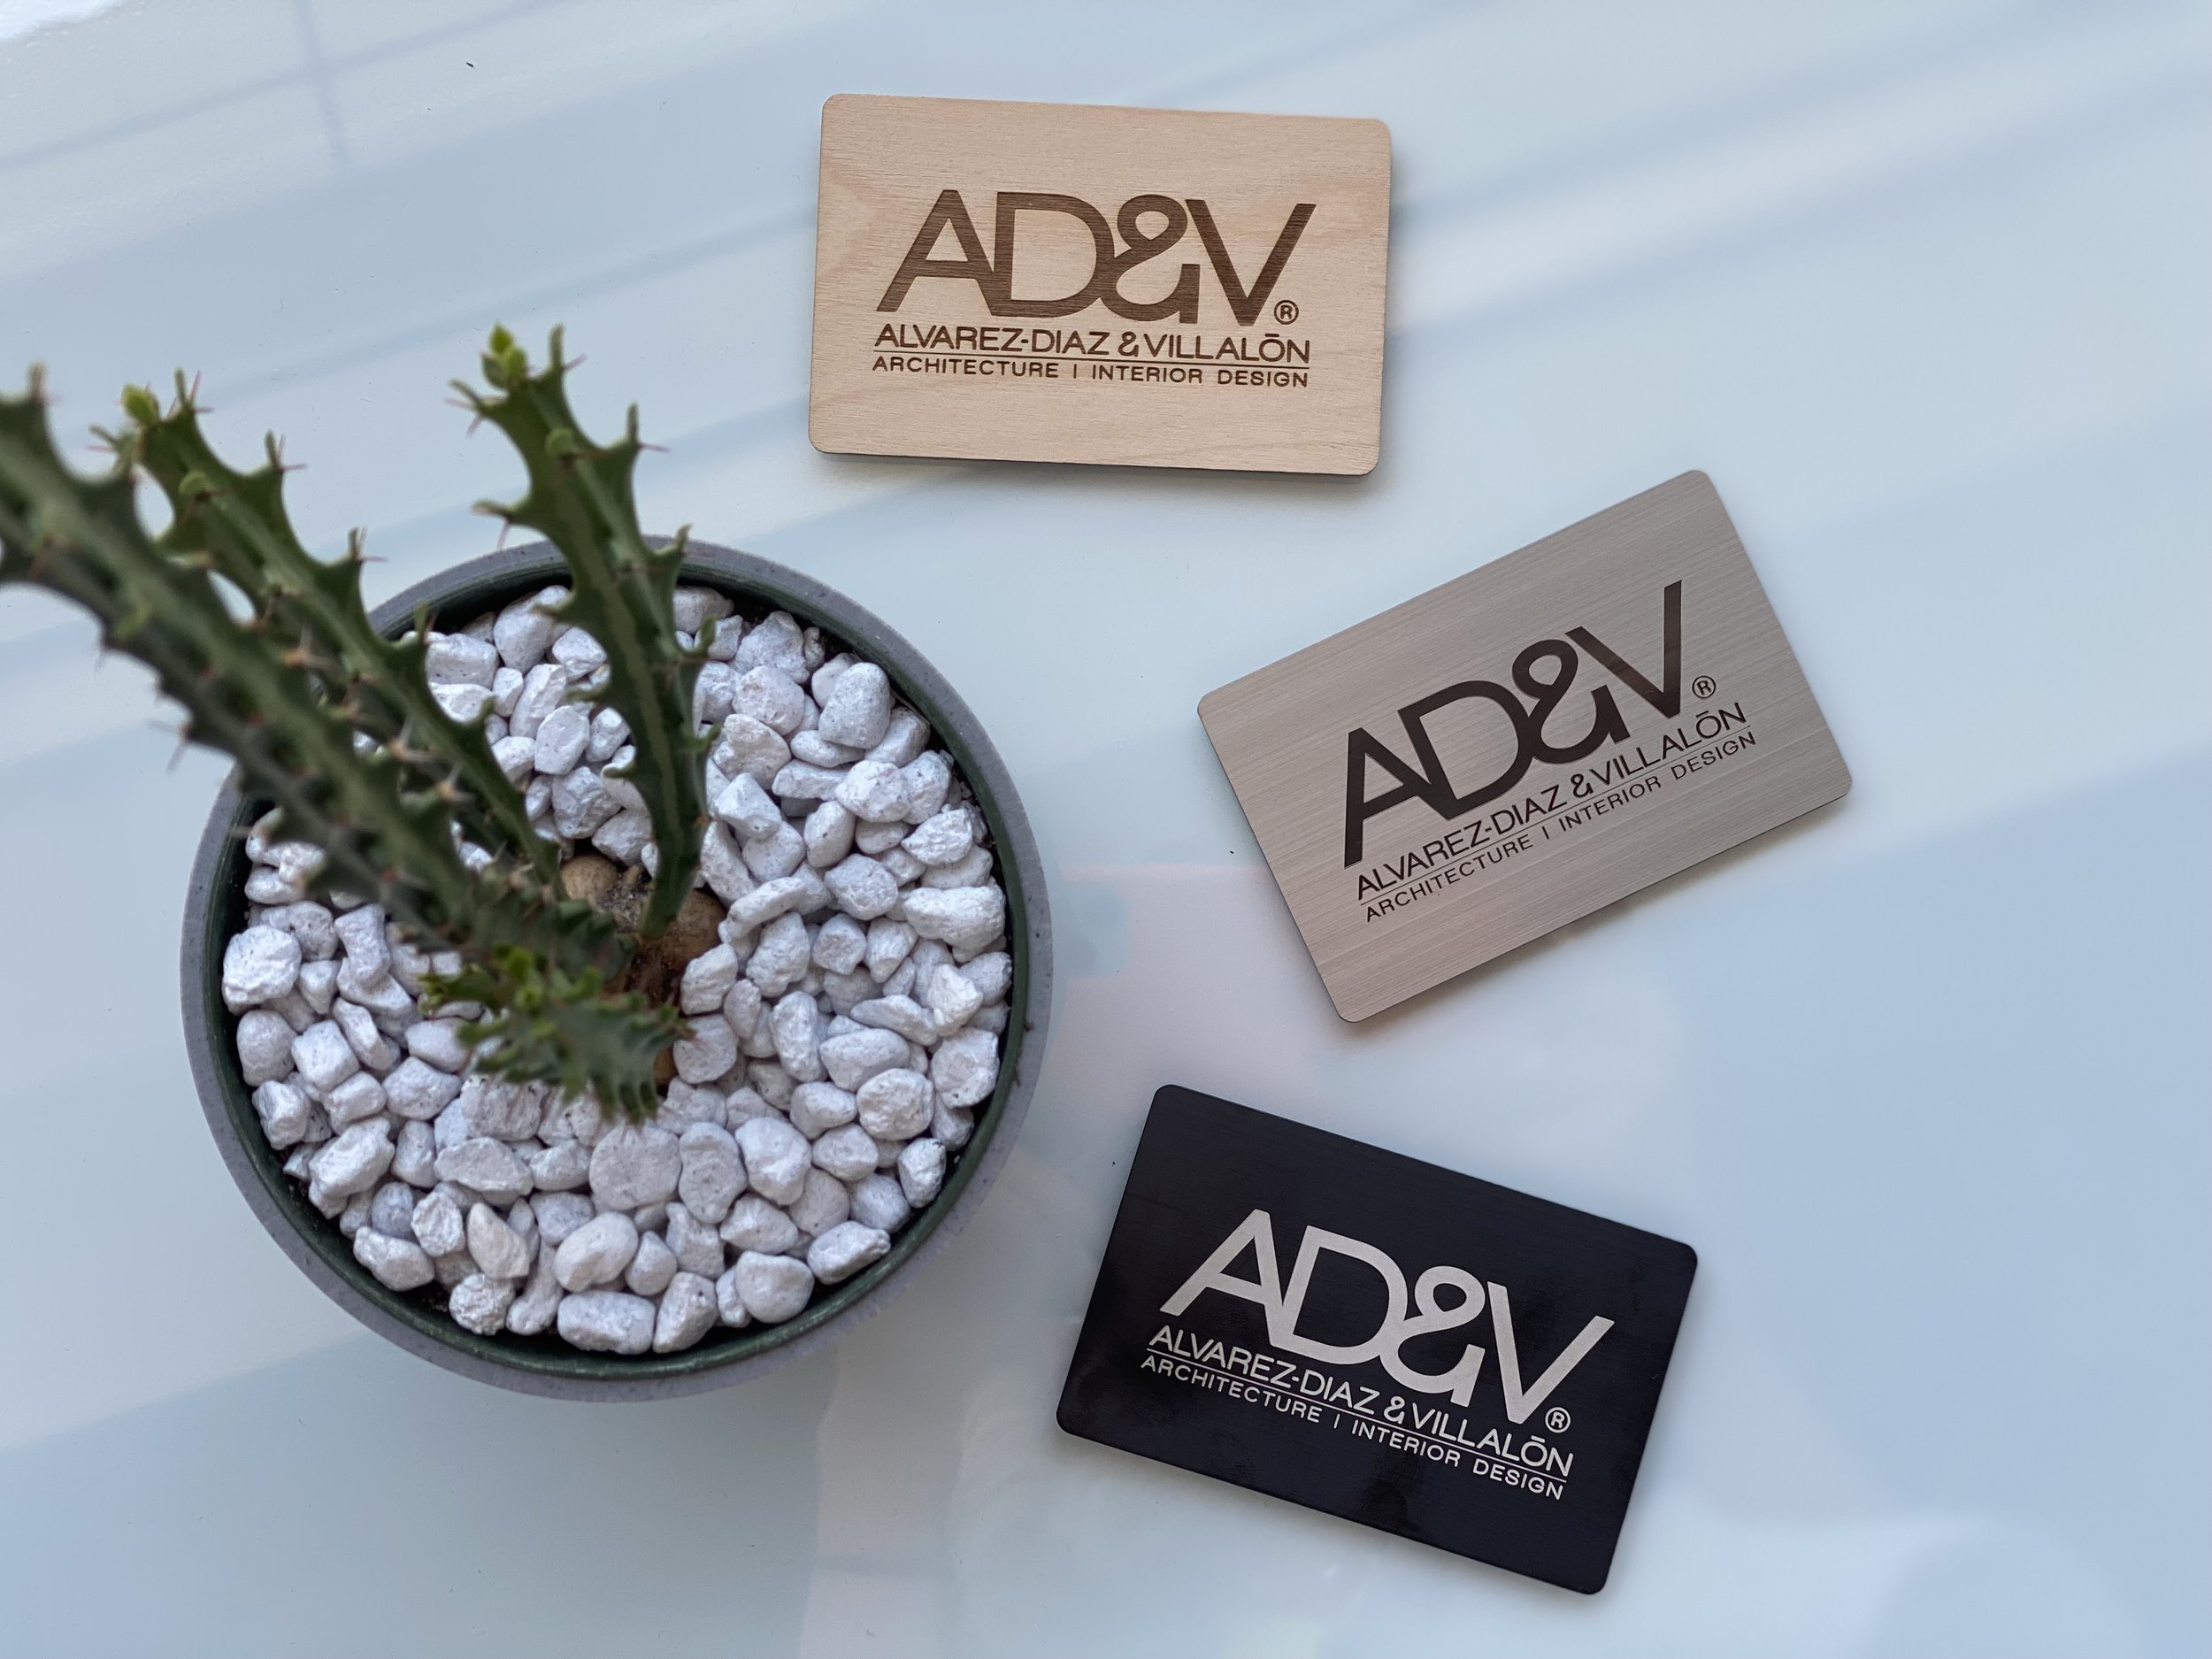  AD&amp;V business cards on table 